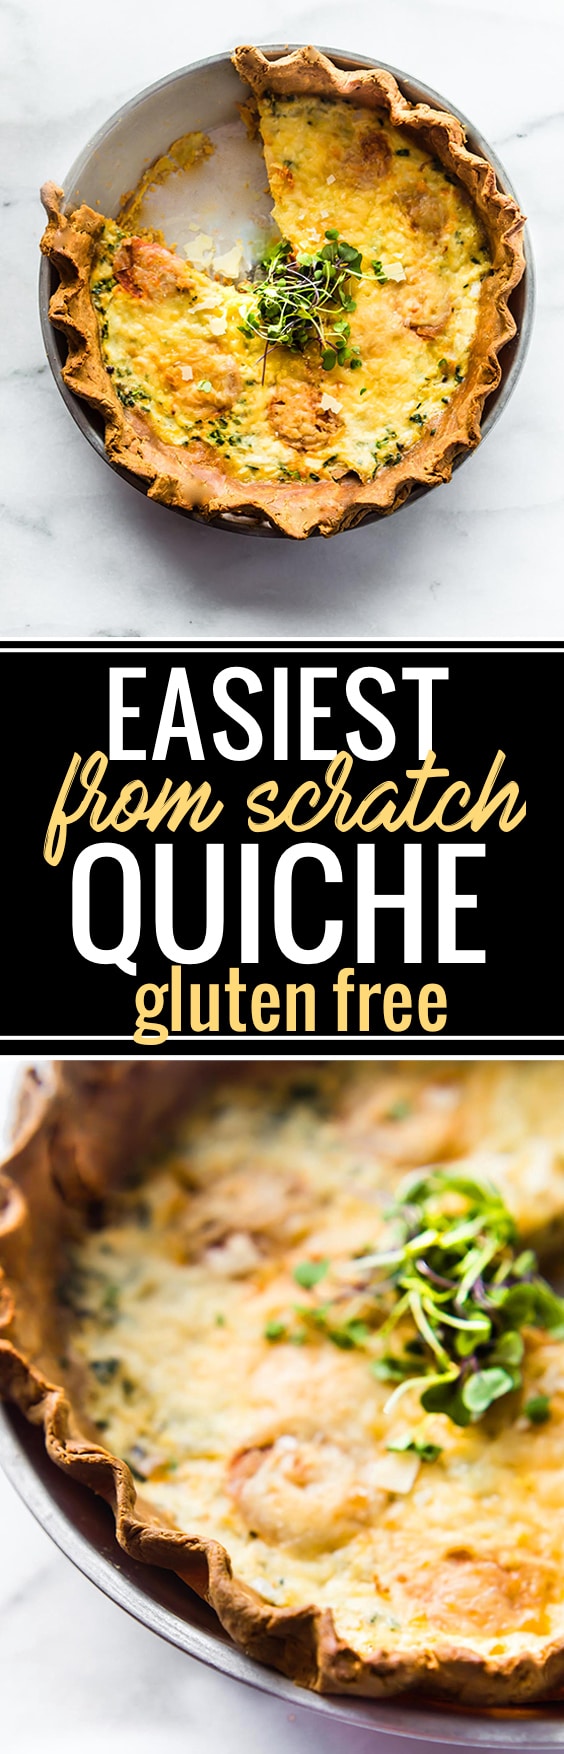 A made from scratch quiche recipe that's easy and gluten free! This quiche takes less than an hour to make, minimal ingredients, and SUPER tasty! Perfect for the holiday brunch. www.cottercrunch.com @cottercrunch